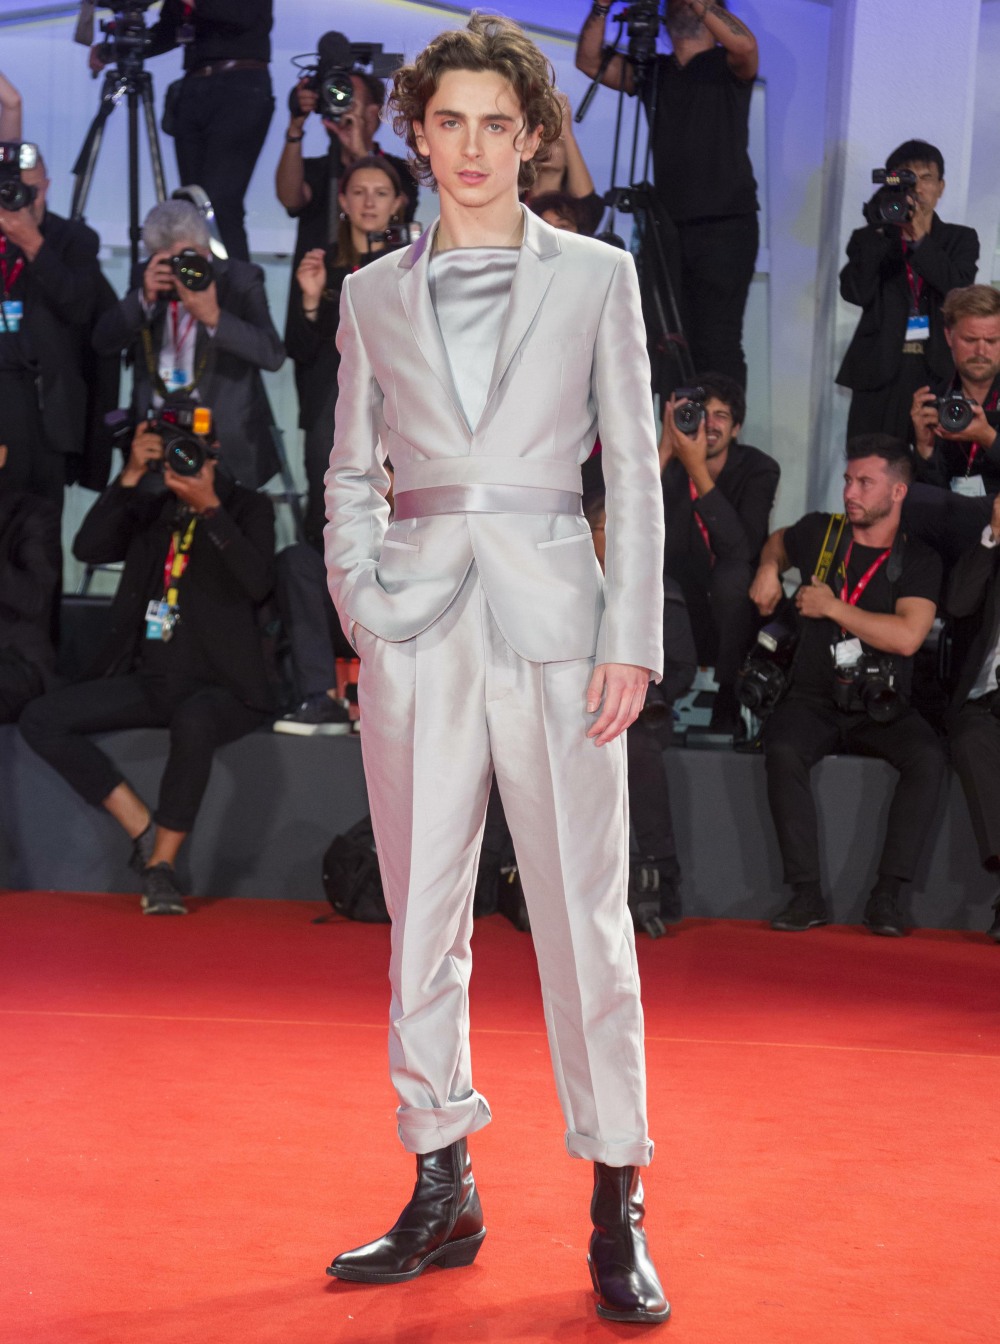 Timothee Chalamet attends the premiere of 'The King' during the 76th Venice Film Festival at Palazzo del Cinema on the Lido in Venice, Italy, on 02 September 2019. | usage worldwide